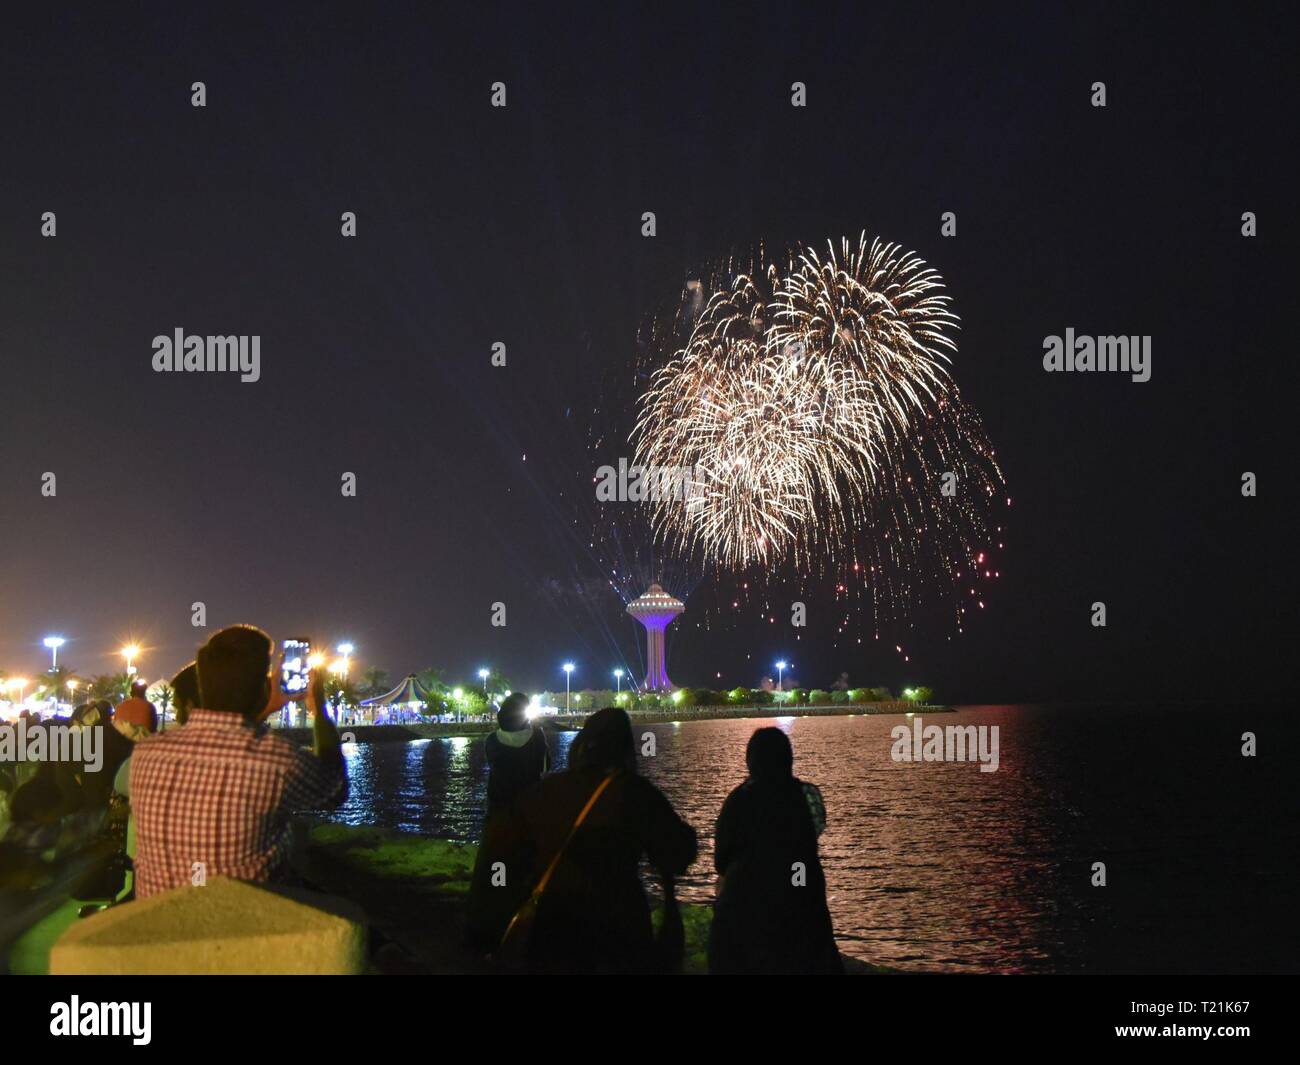 Khobar. 29th Mar, 2019. Visitors take pictures of fireworks during the Sharqiah Season by the Al-Khobar corniche in Eastern Province of Saudi Arabia, March 29, 2019. The Sharqiah Season, held in nine cities in Eastern Province, wrapped up on March 30. Over the period of 17 days, the season entailed a carefully crafted selection of over 100 programs and activities covering culture, sports, education and entertainment. Credit: Tu Yifan/Xinhua/Alamy Live News Stock Photo